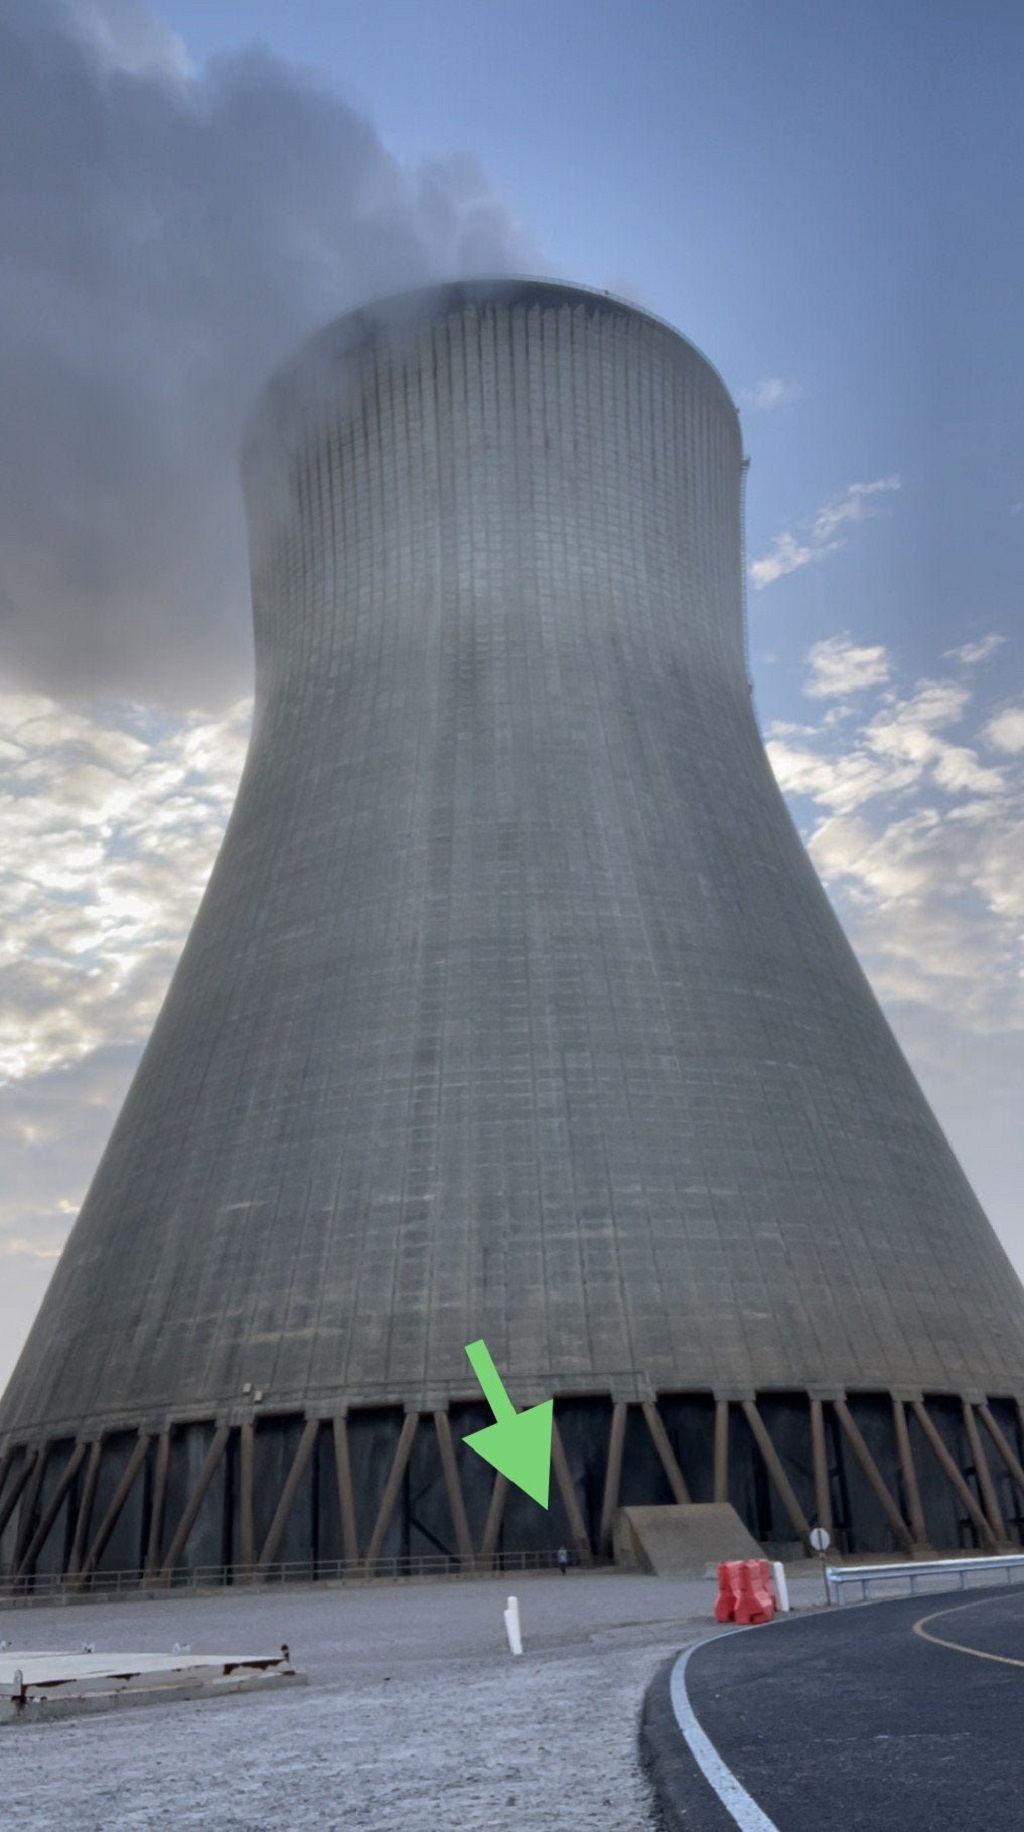 Man Compared To A Nuclear Cooling Tower